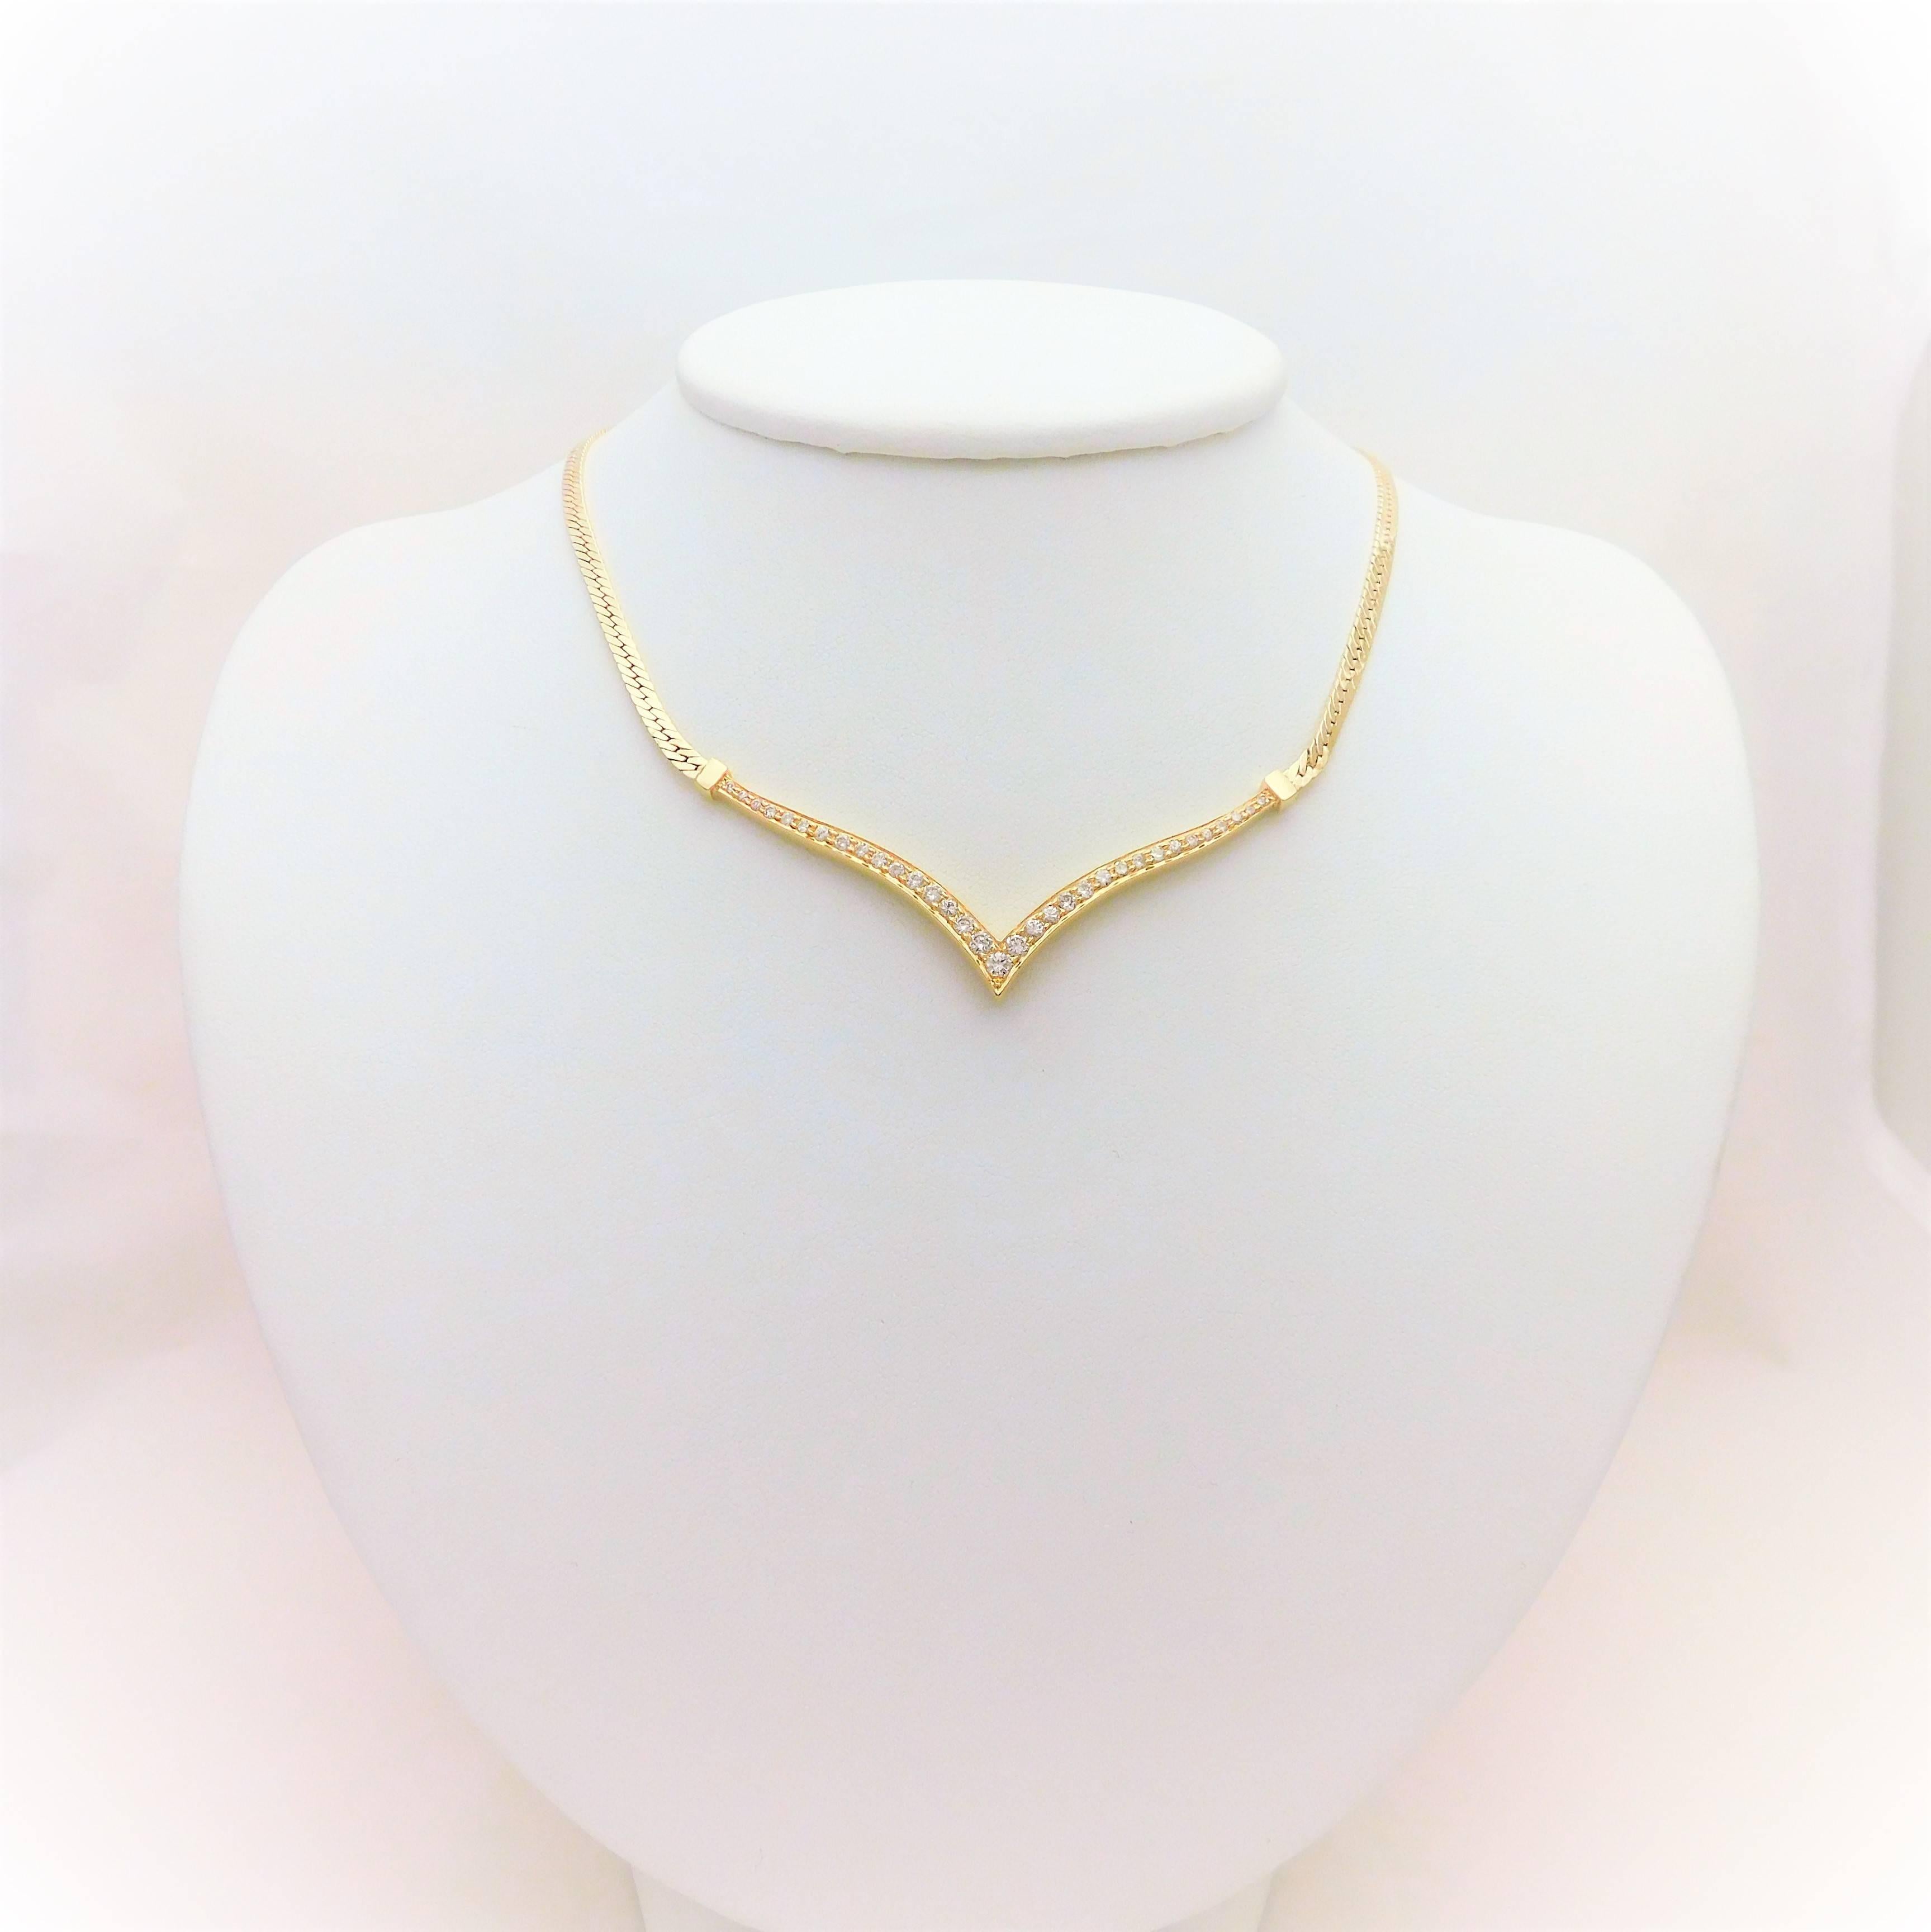 From a charming Southern estate. Circa 1960.  This breathtaking necklace has been crafted in solid 14k yellow gold. The gorgeous flat 3mm herringbone chain connects to a dazzling V shaped 14k gold pendant jeweled with 33 round brilliant-cut diamonds